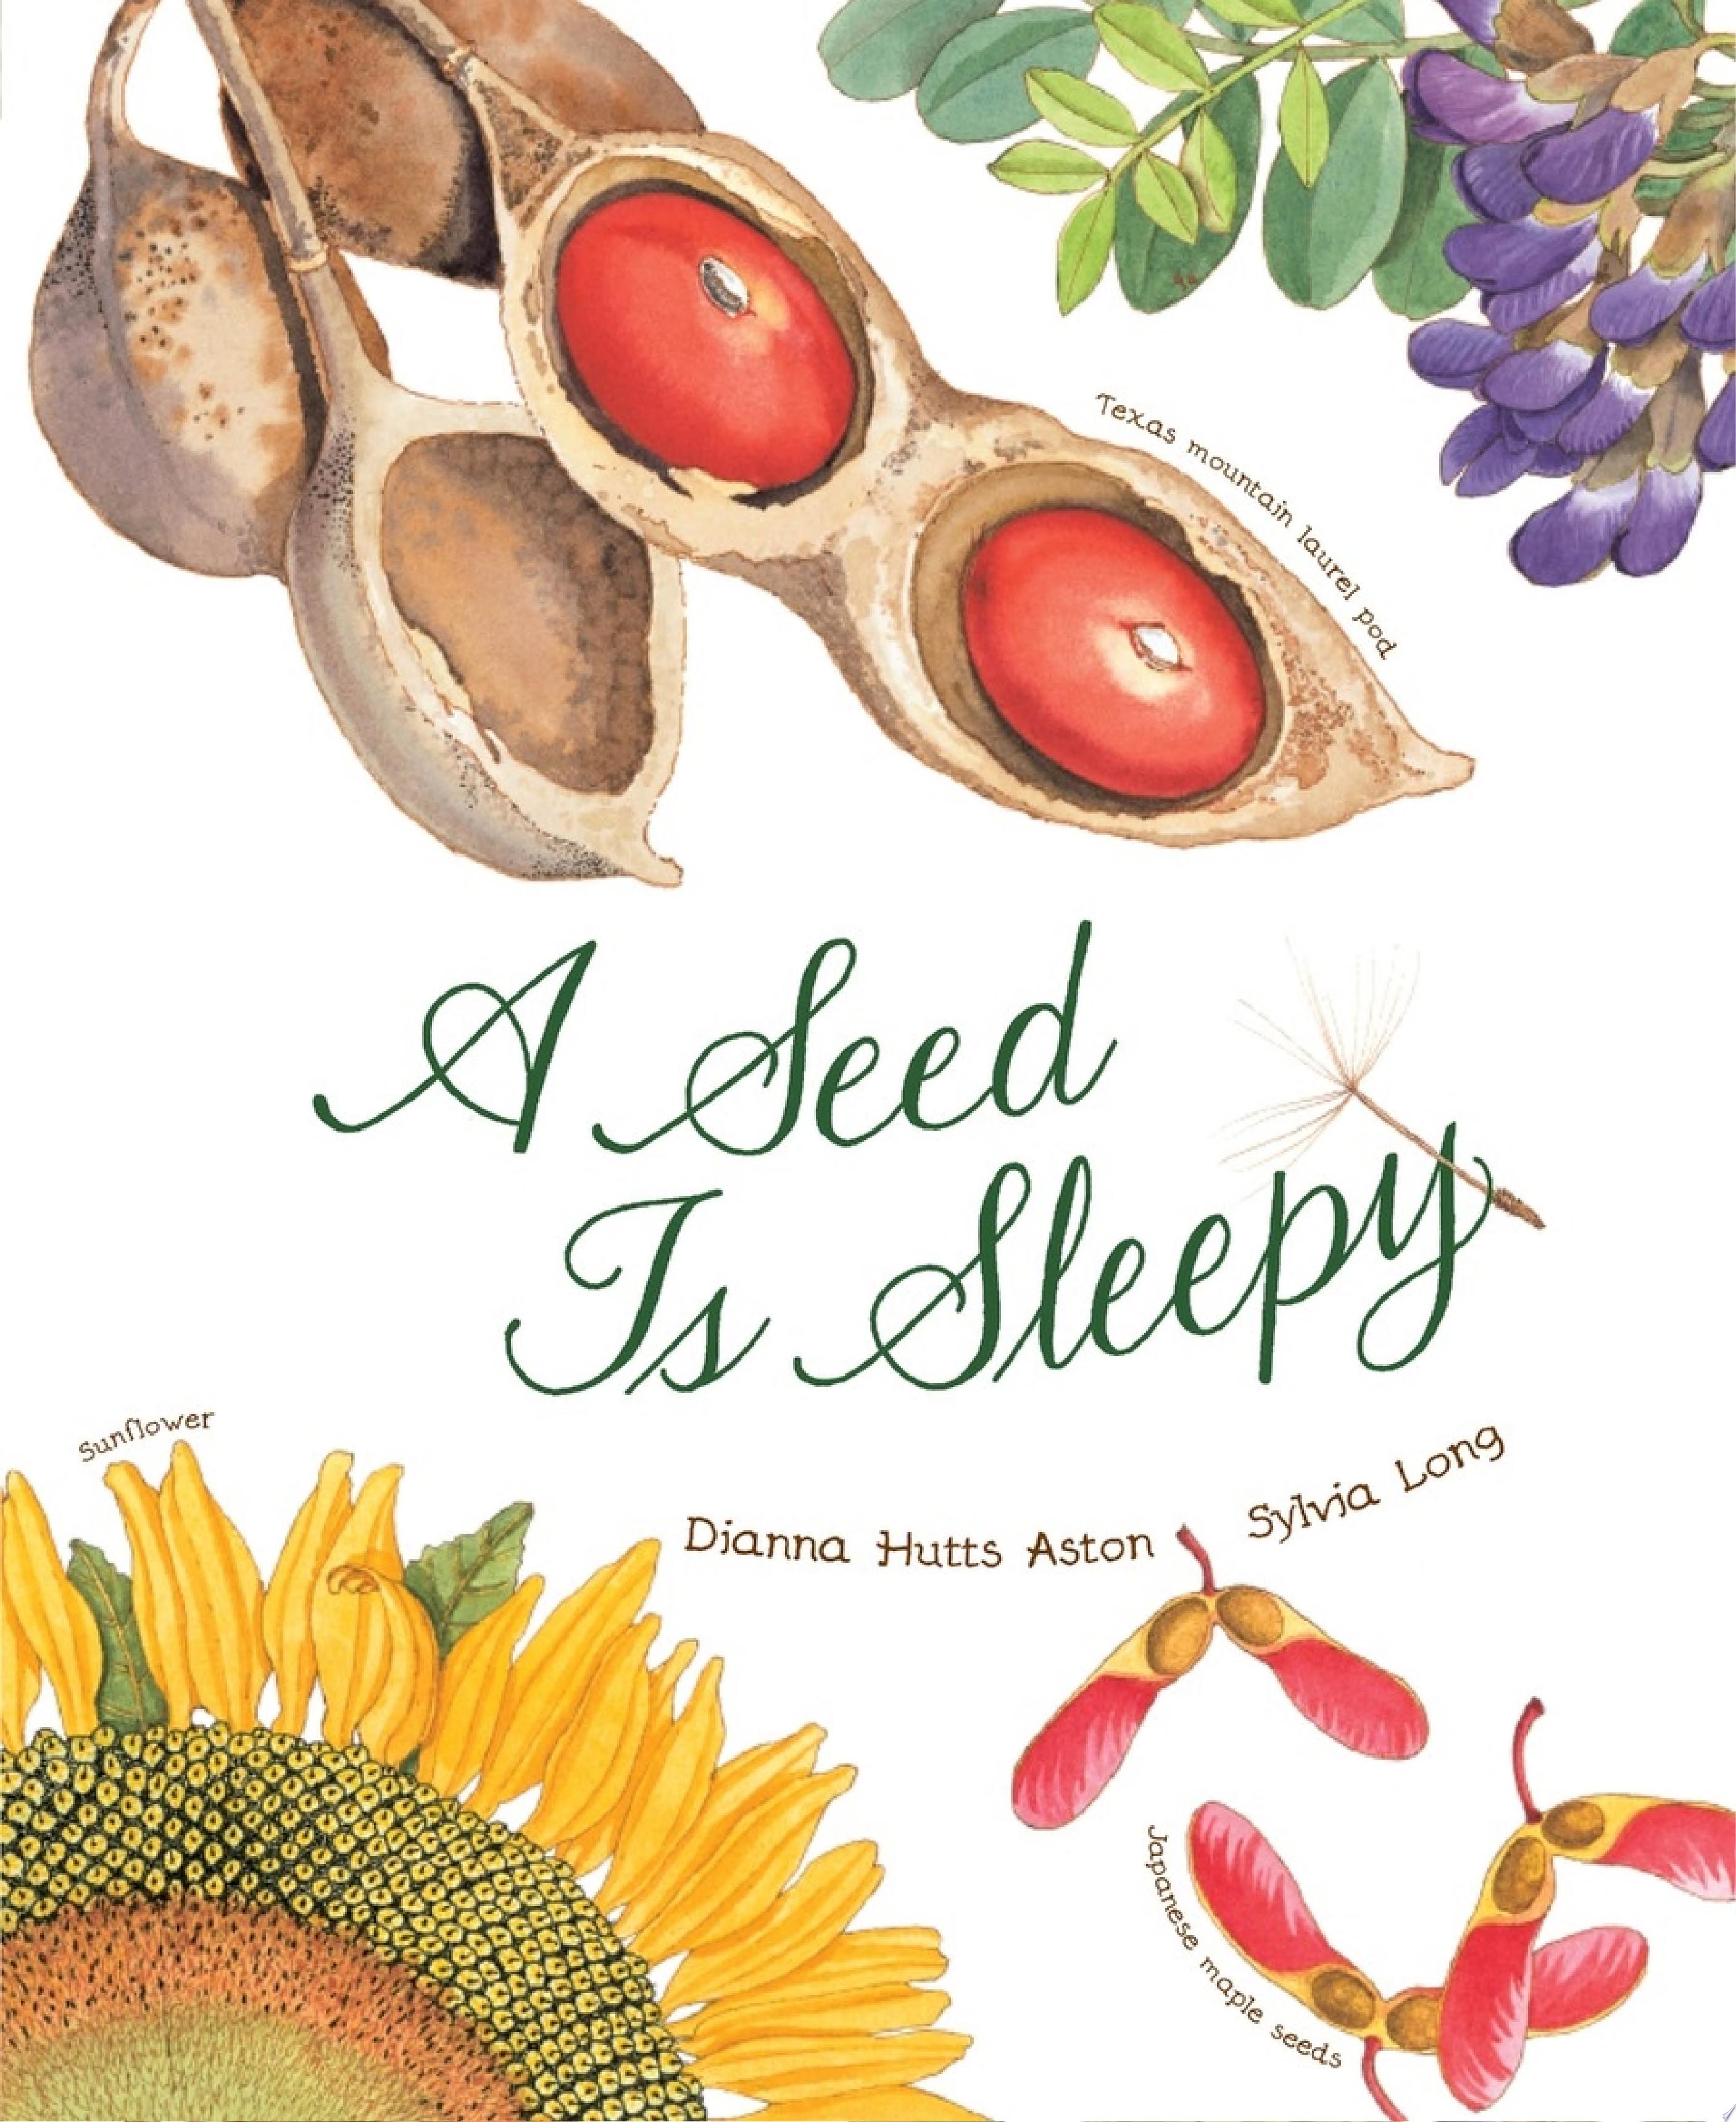 Image for "A Seed Is Sleepy"